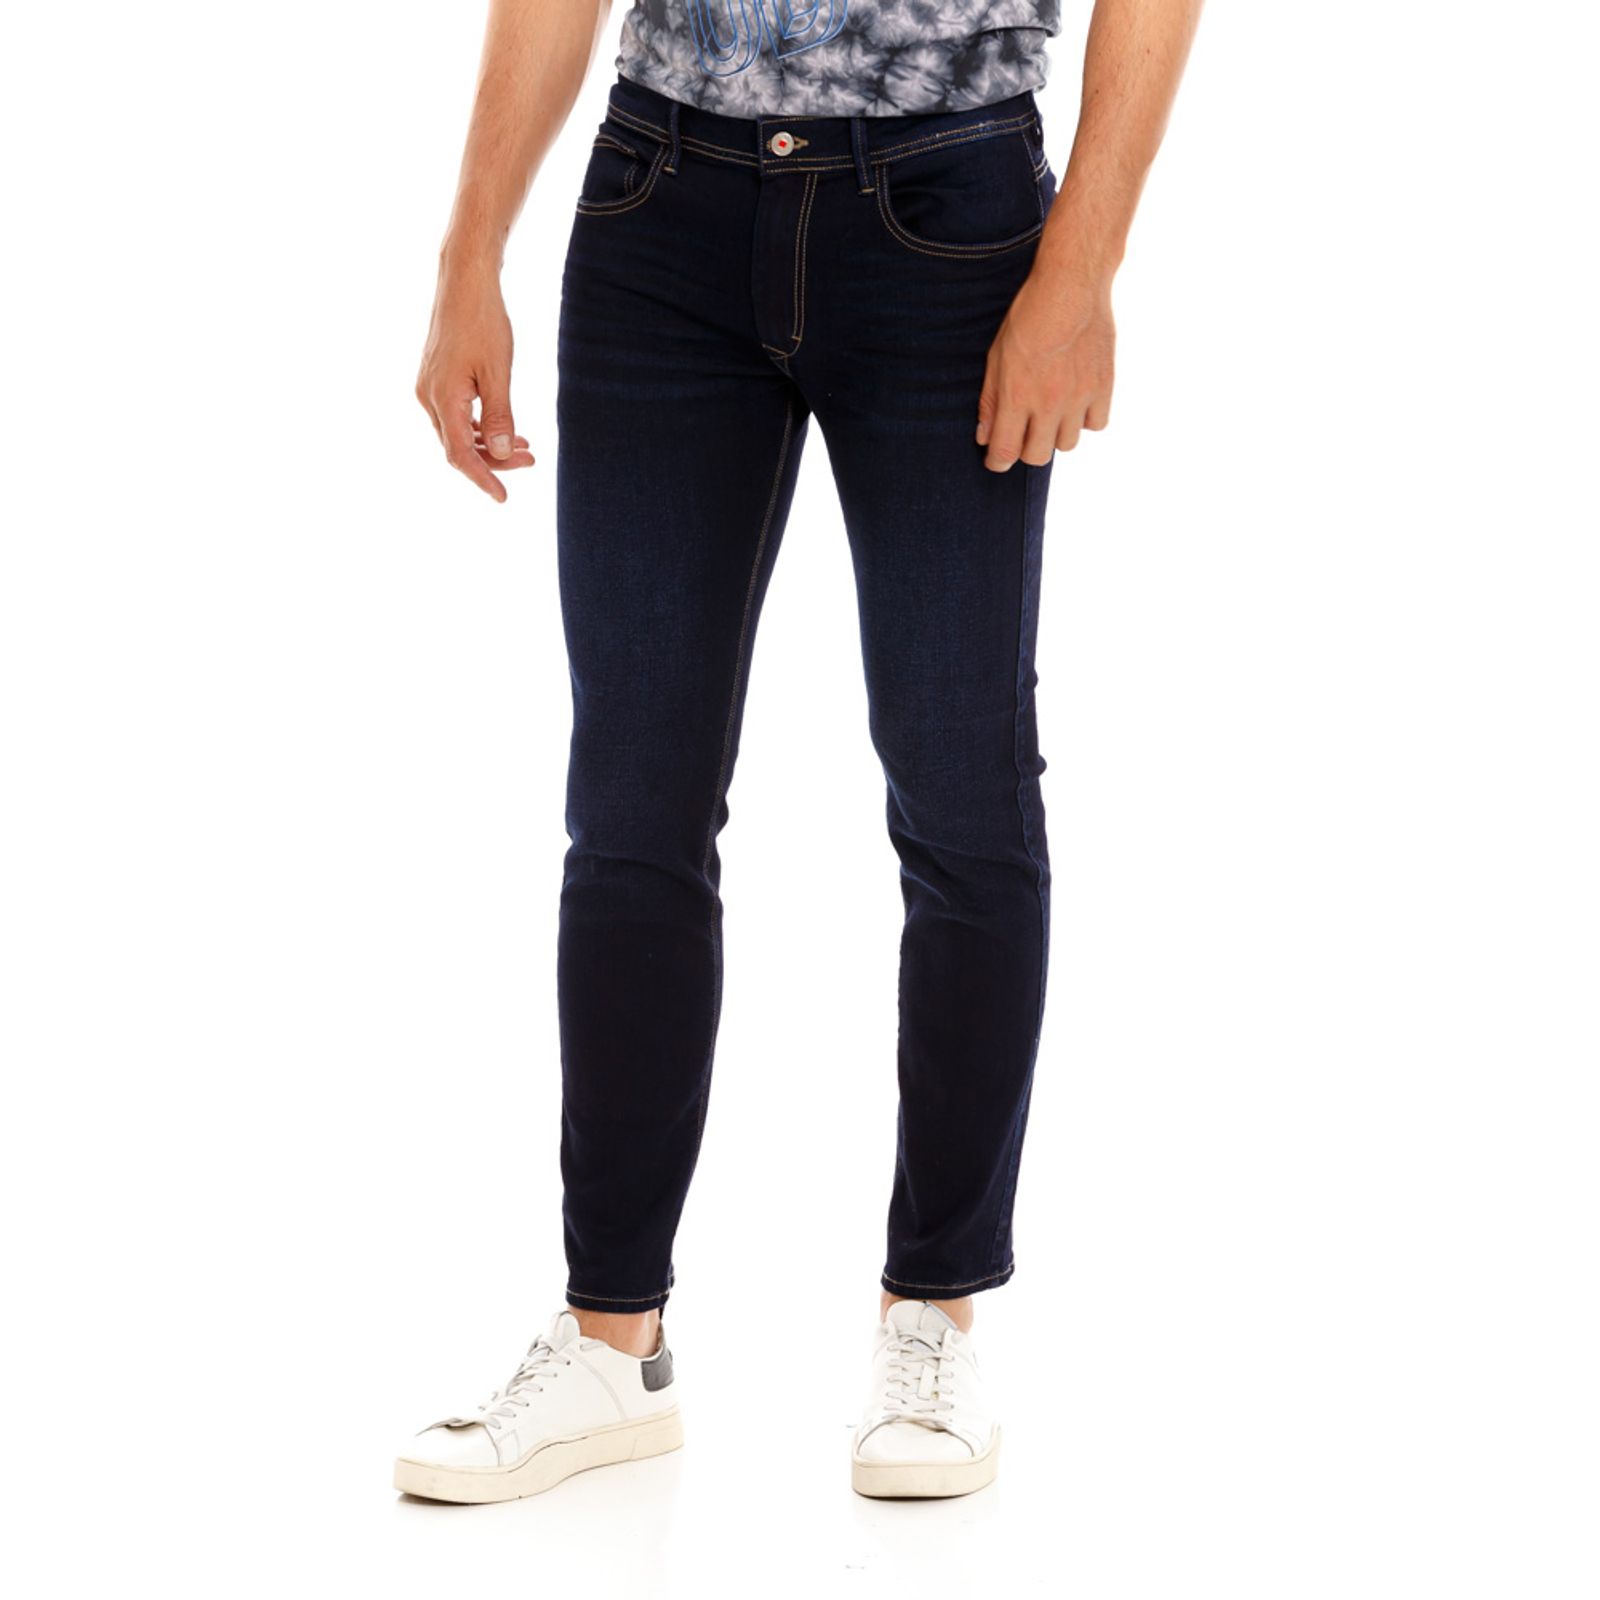 Jean Stretch Para Hombre Conventional Marithe Francois Girbaud 1930 Jeans Girbaud Girbaud Colombia